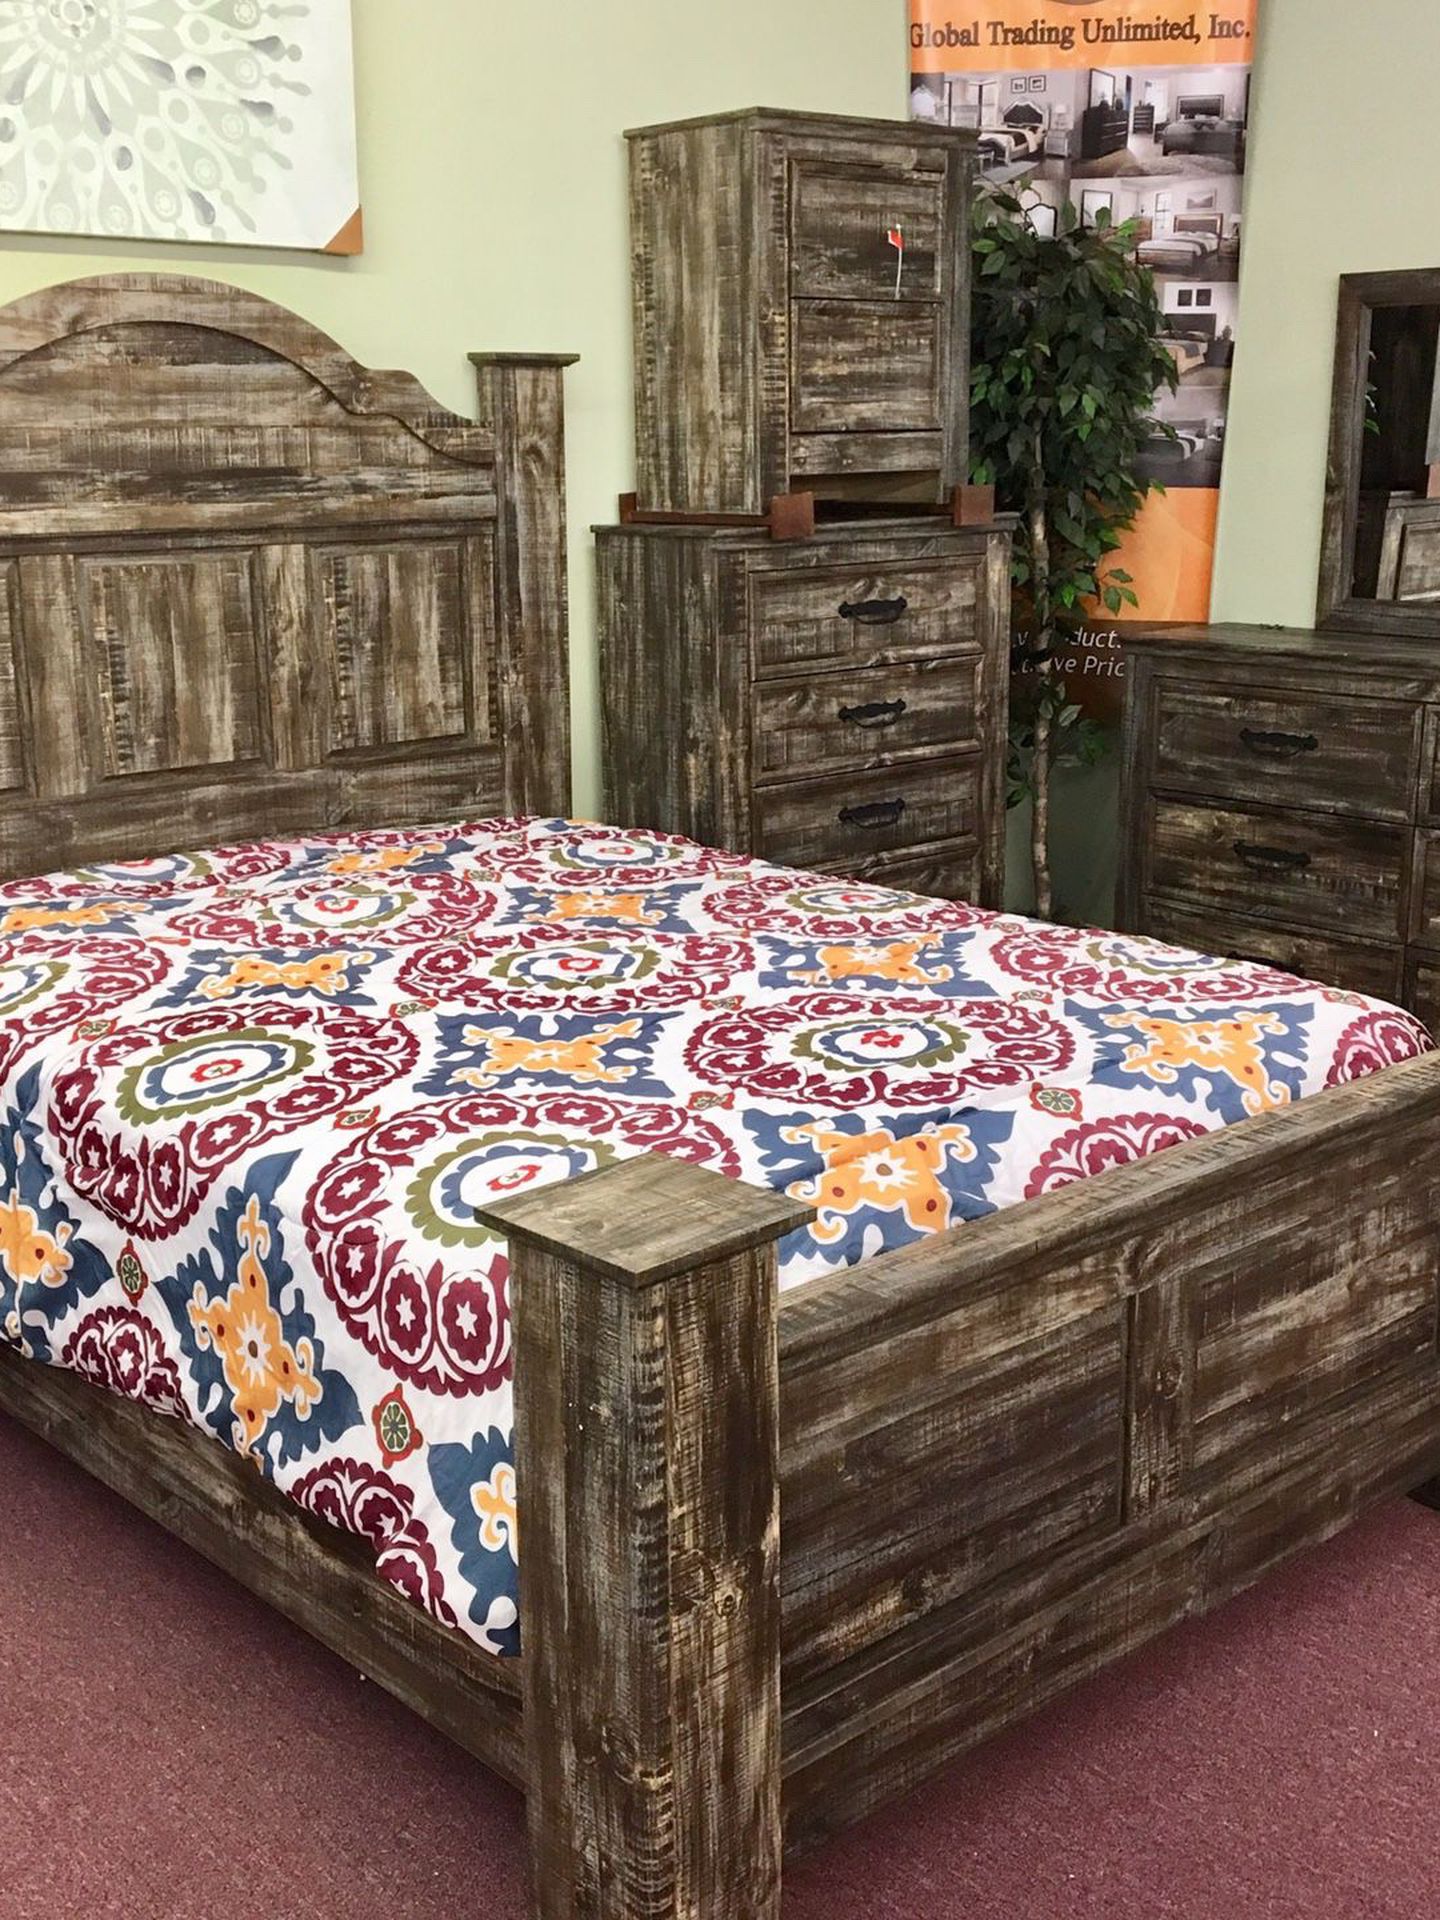 🇺🇸HUGE Blowout Furniture Sale!🇺🇸 Brand New 6PC Queen Size Bedroom Set! $50 Down Takes It Home Today!